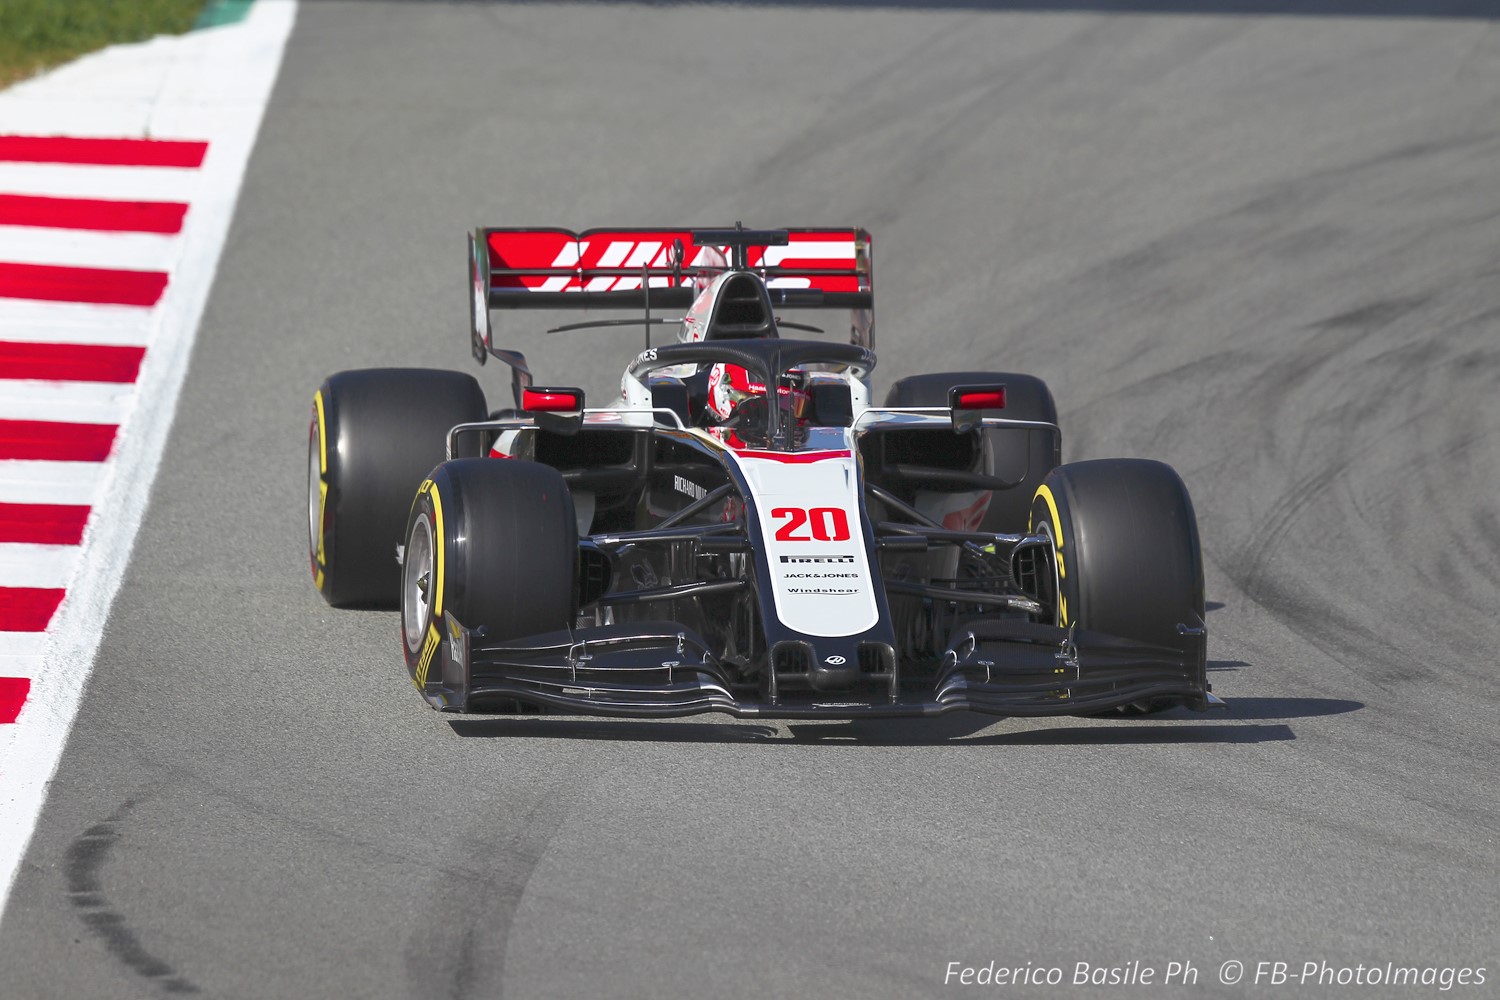 Magnussen in the 98% non American Haas